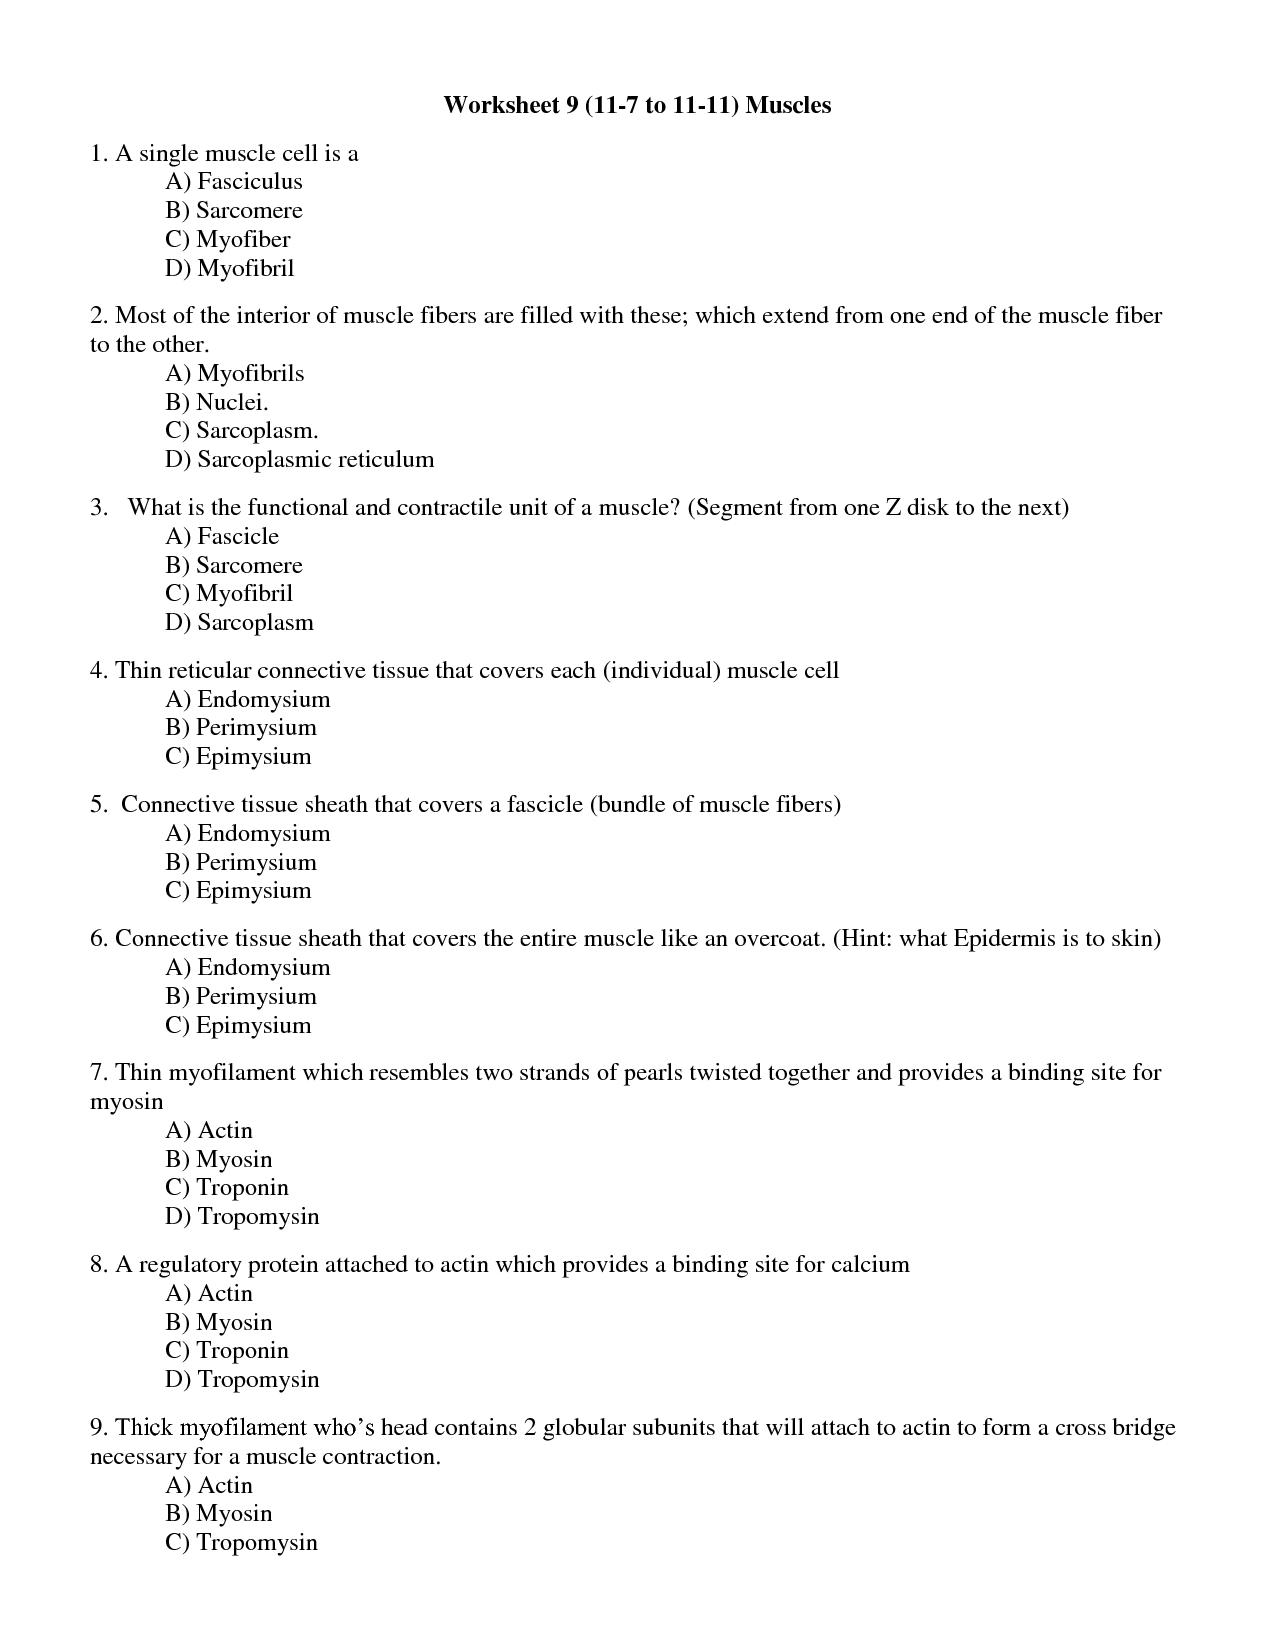 19-best-images-of-muscle-contraction-worksheet-muscle-contraction-worksheet-answers-muscle